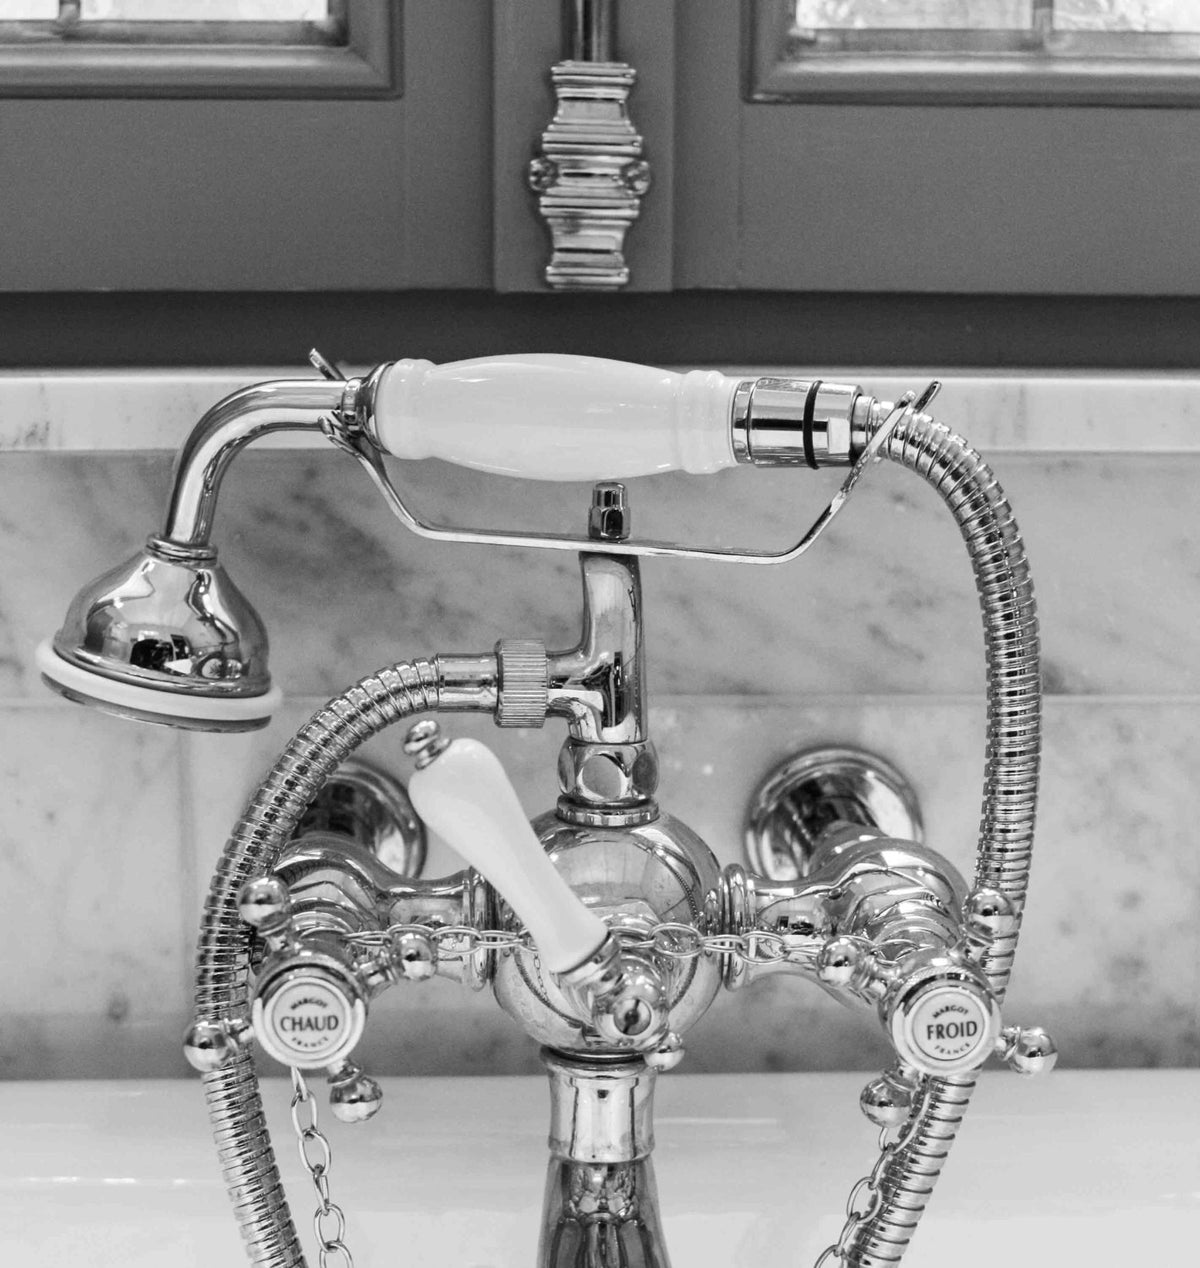 French Hot and Cold Bathroom Faucet Set of 4 - Every Day Paris 